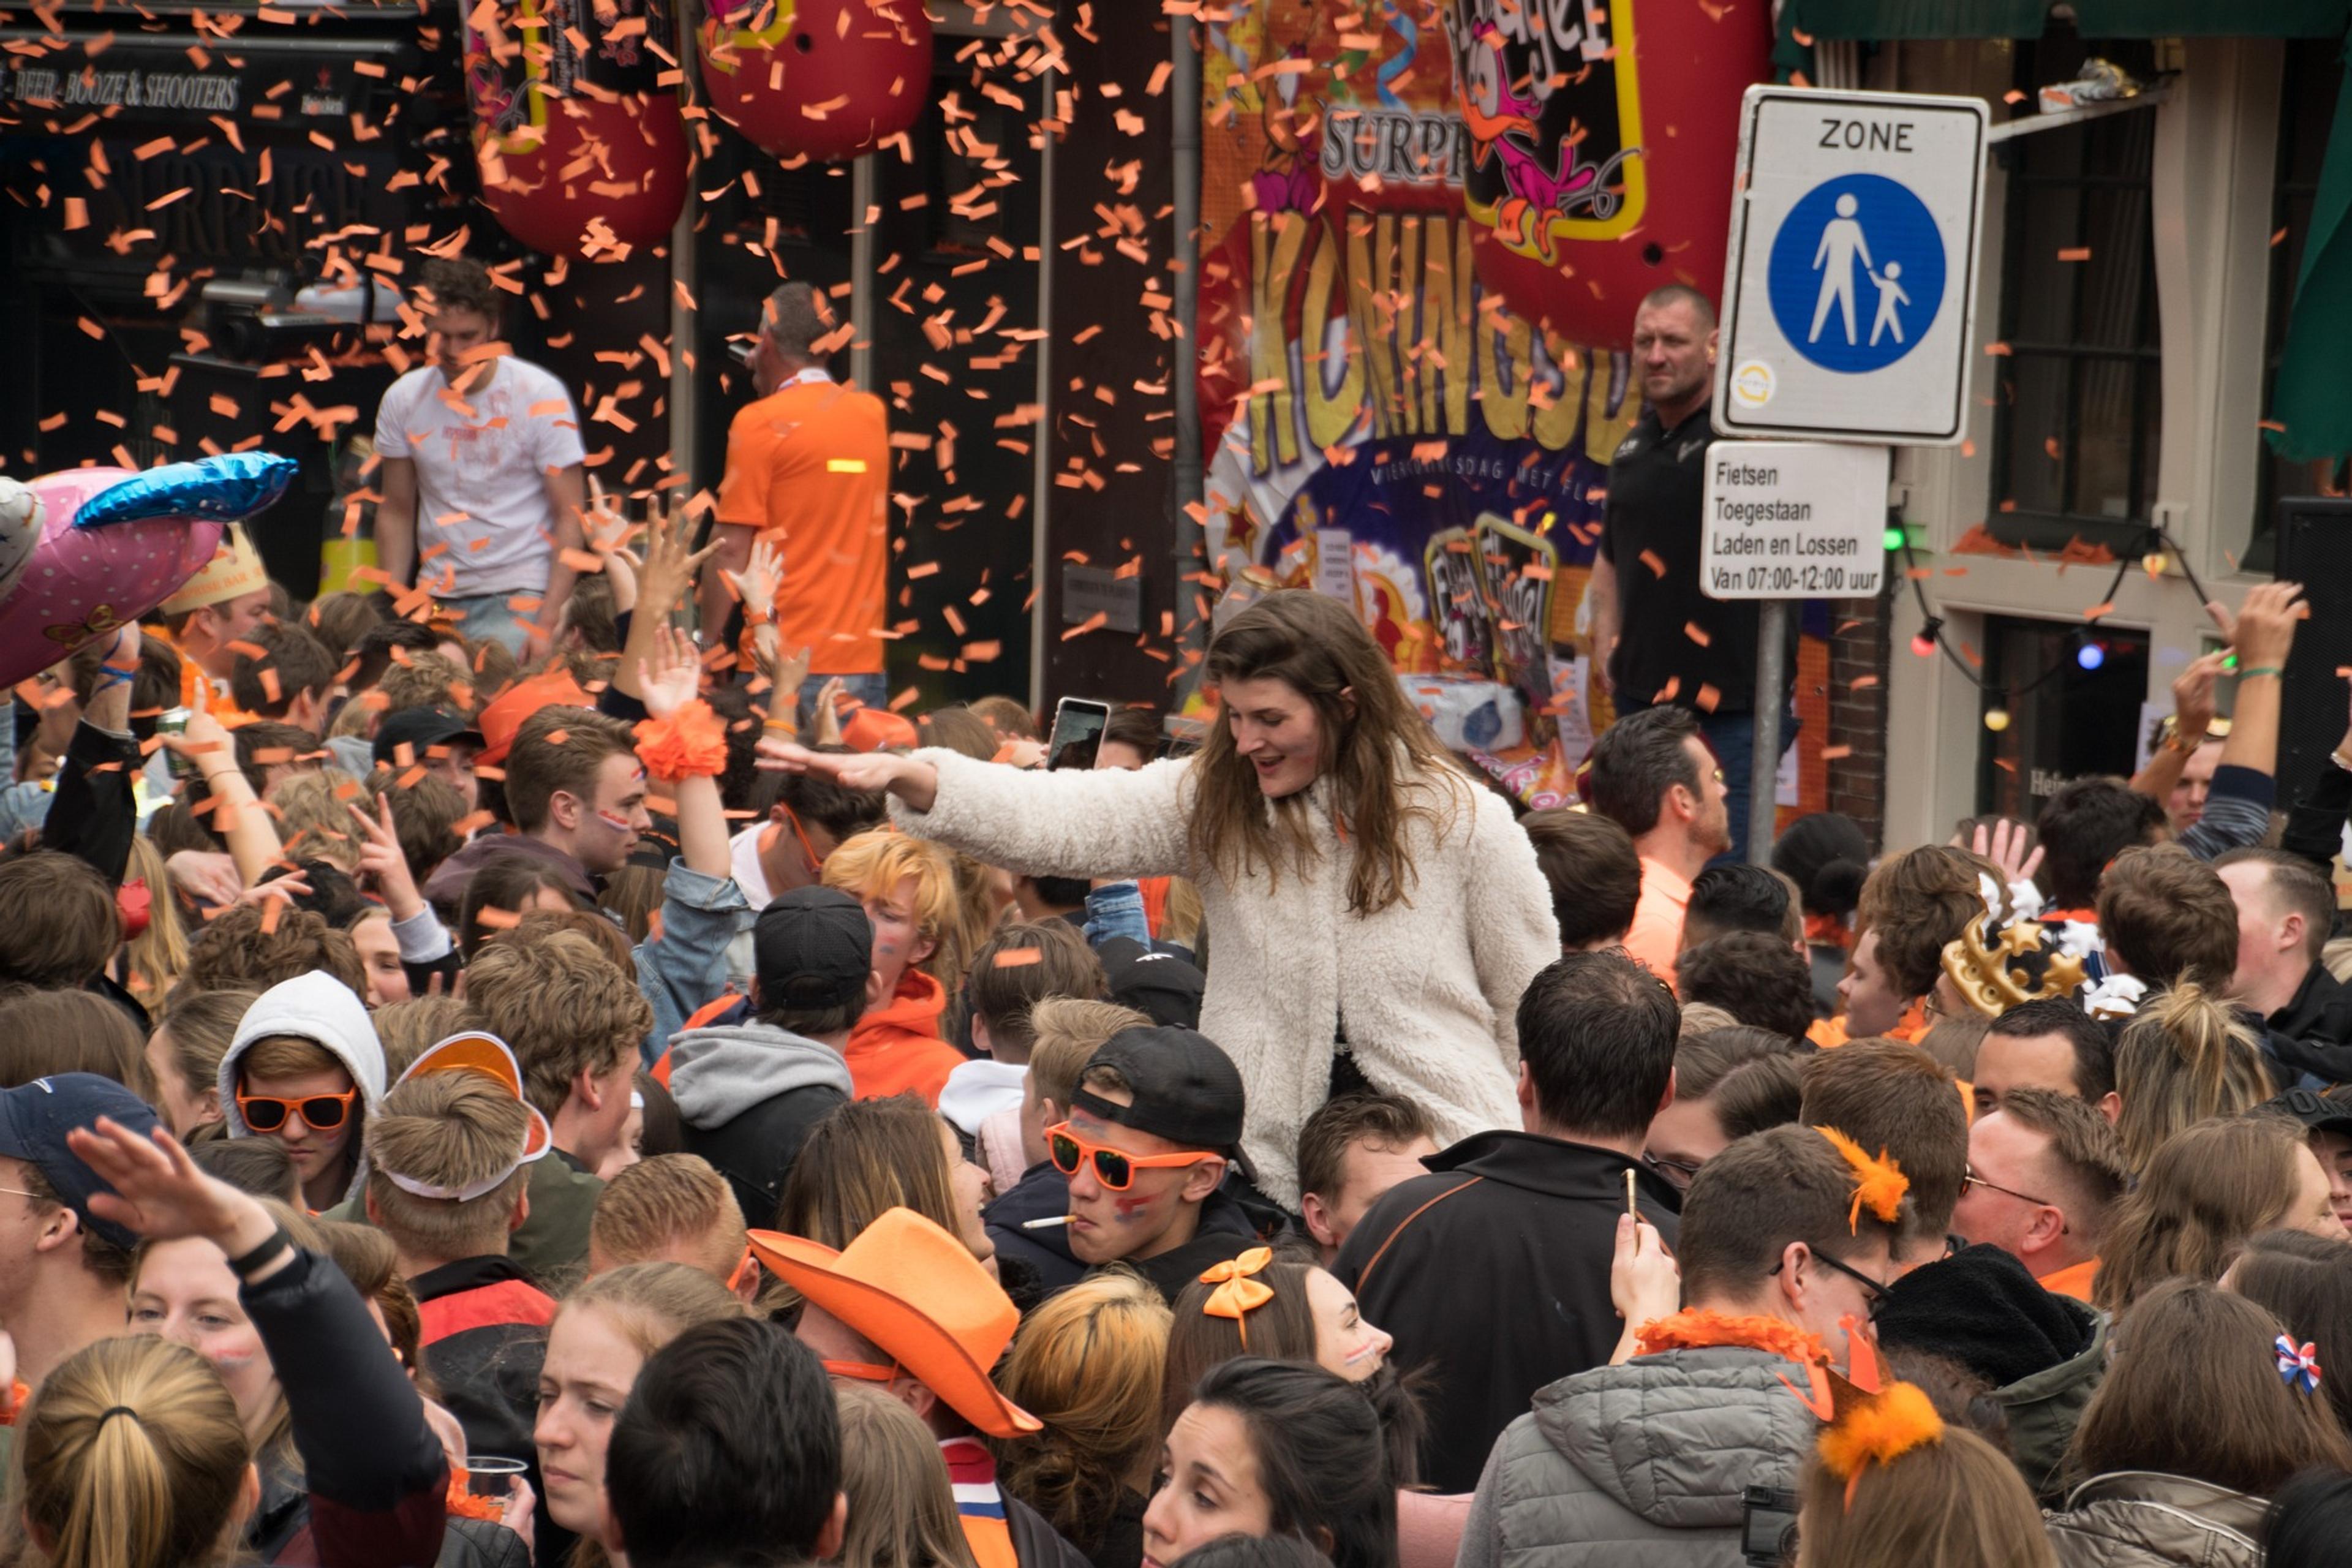 A true Dutch party - King's Day in Rotterdam